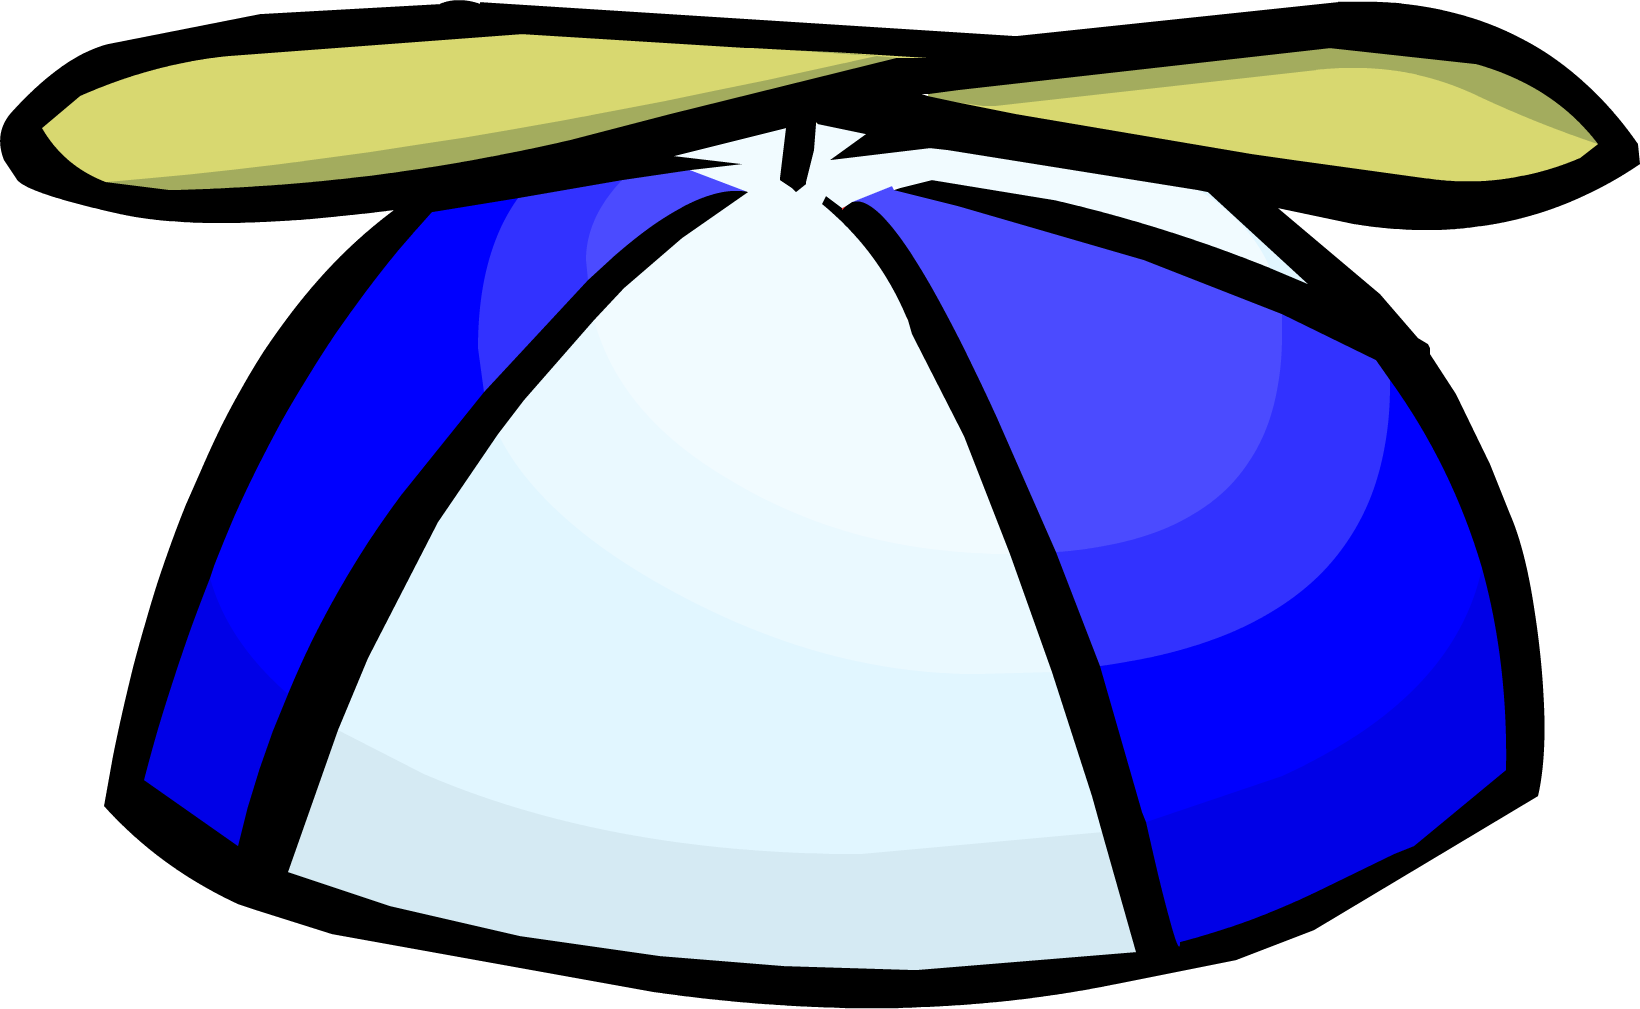 Image Result For Spinner Hat Free Images Brewing - Club Penguin Propeller Hat (1640x1009)